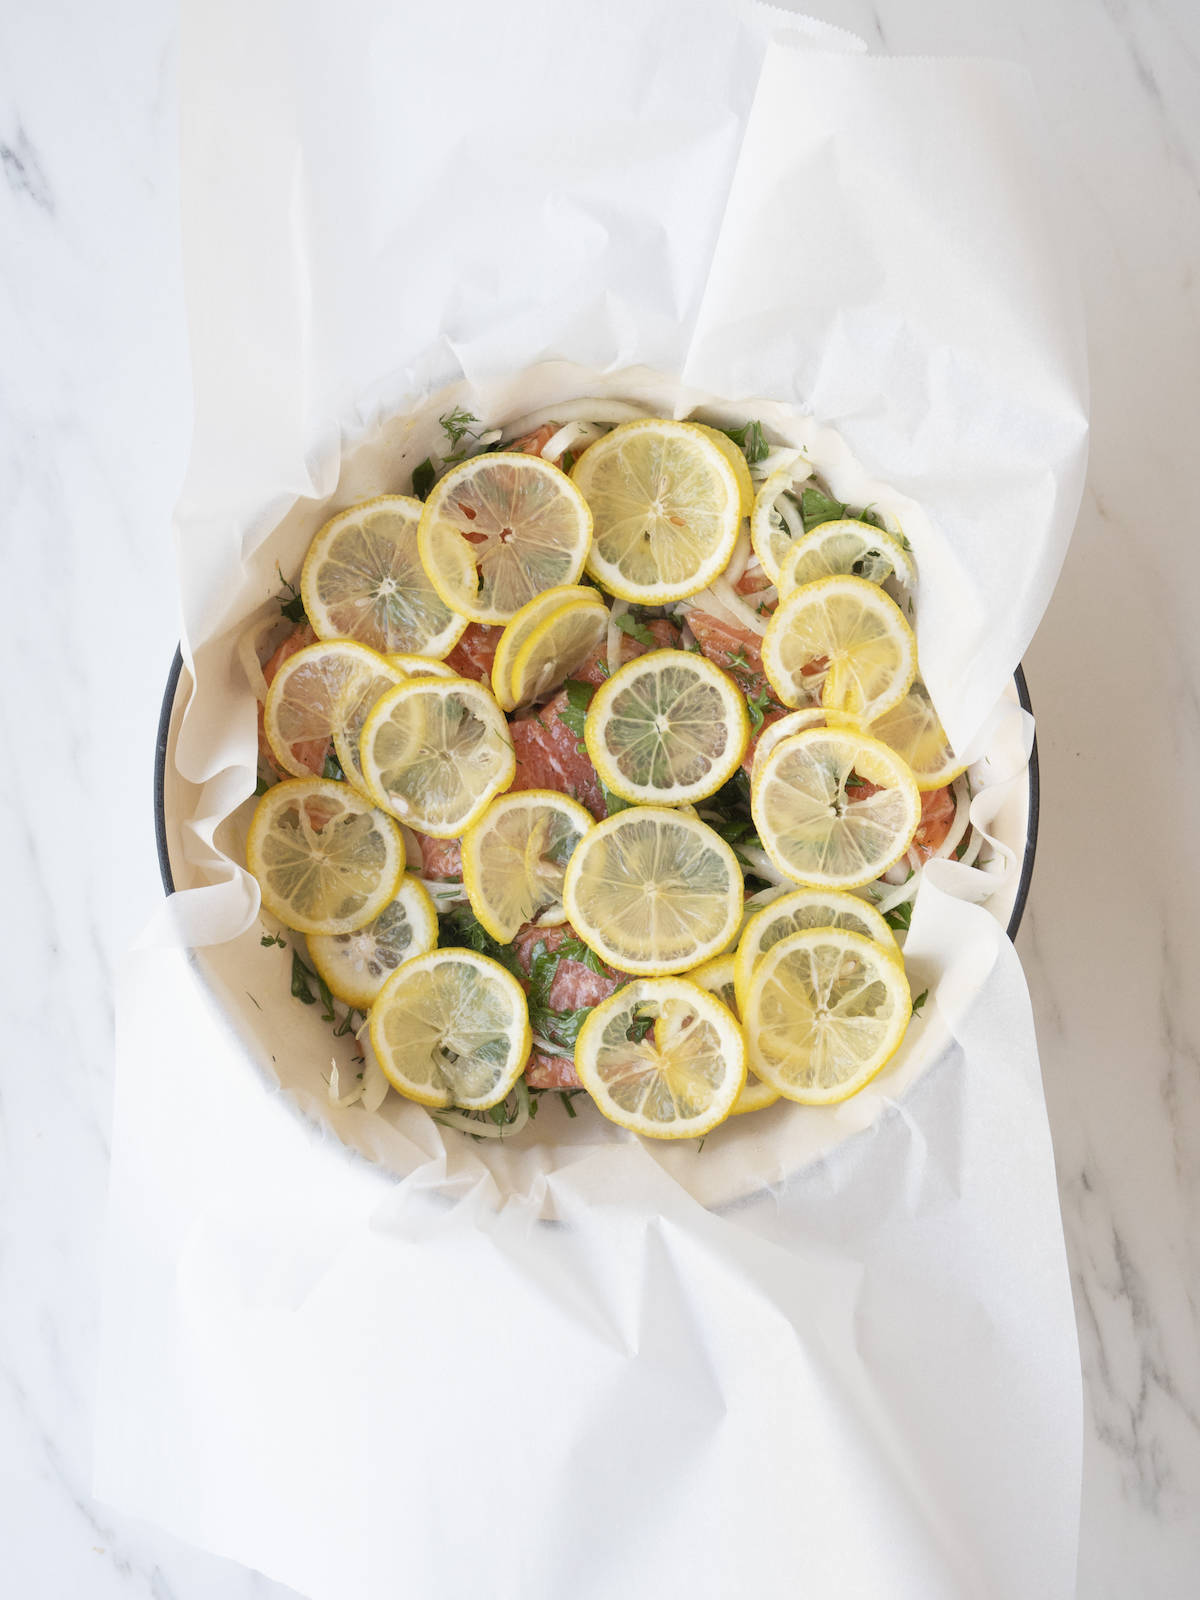 A skillet lined with parchment paper with the salmon fillets completely covered with thin slices of lemon.